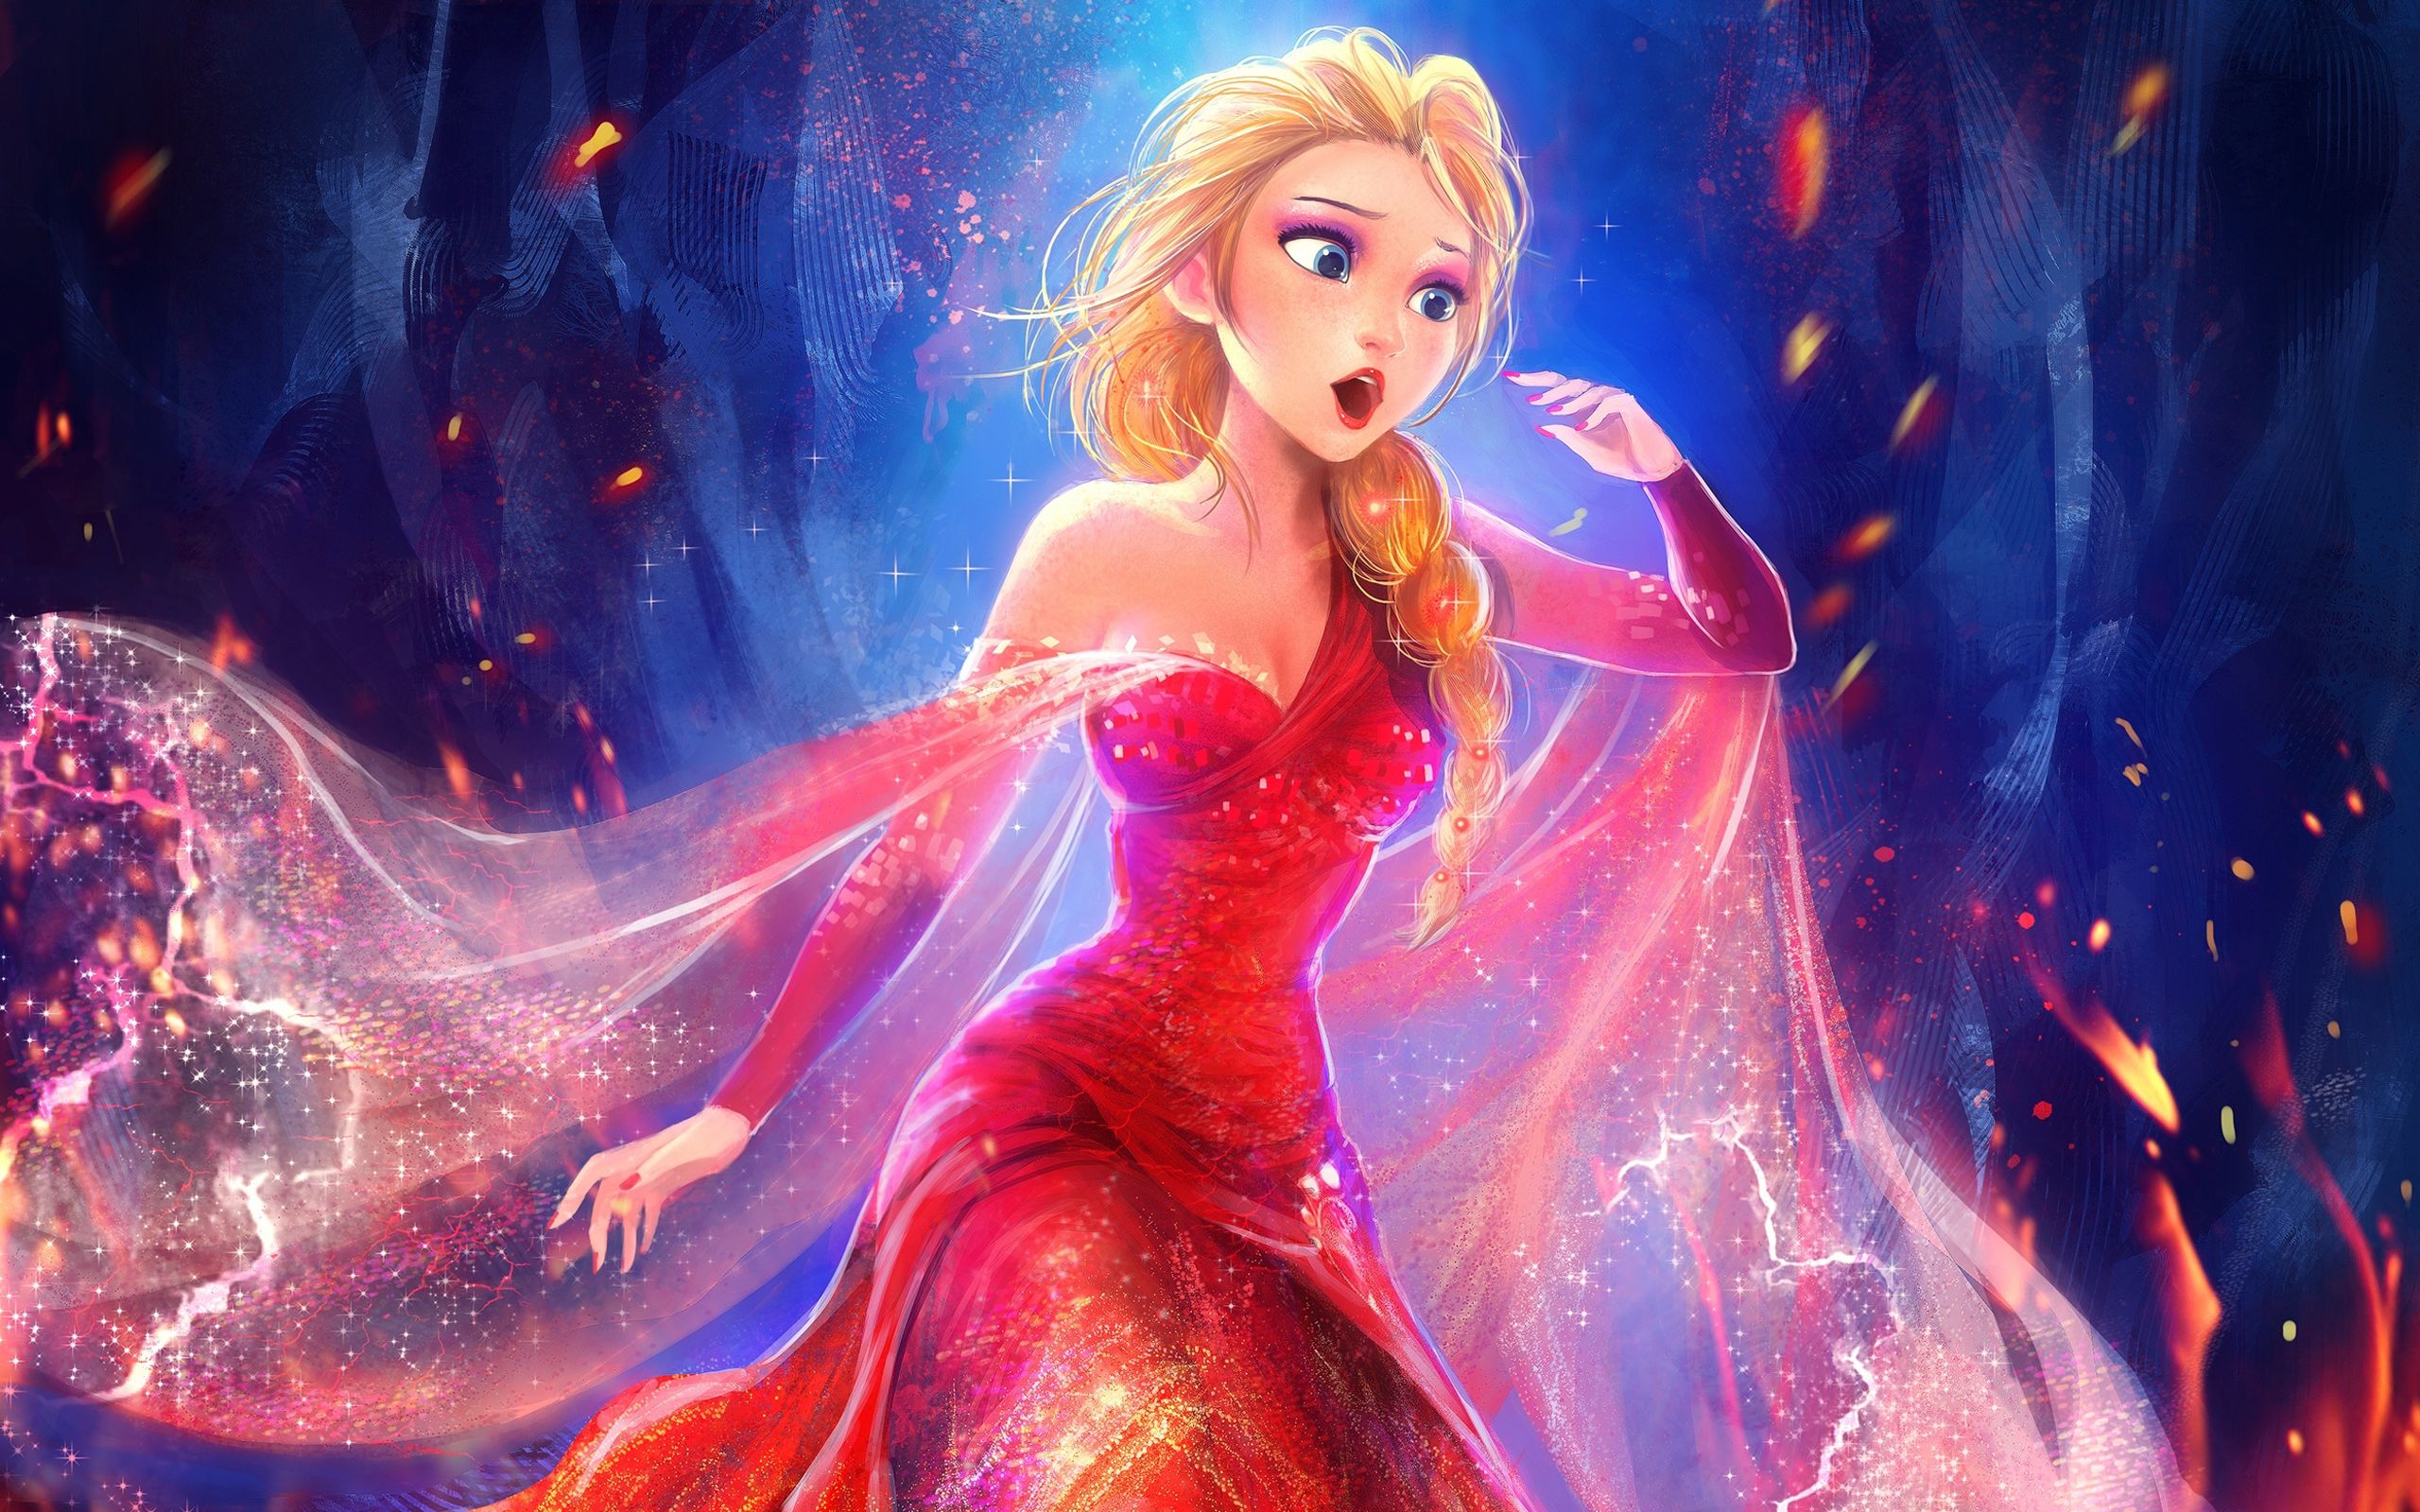 Elsa 4K wallpaper for your desktop or mobile screen free and easy to download